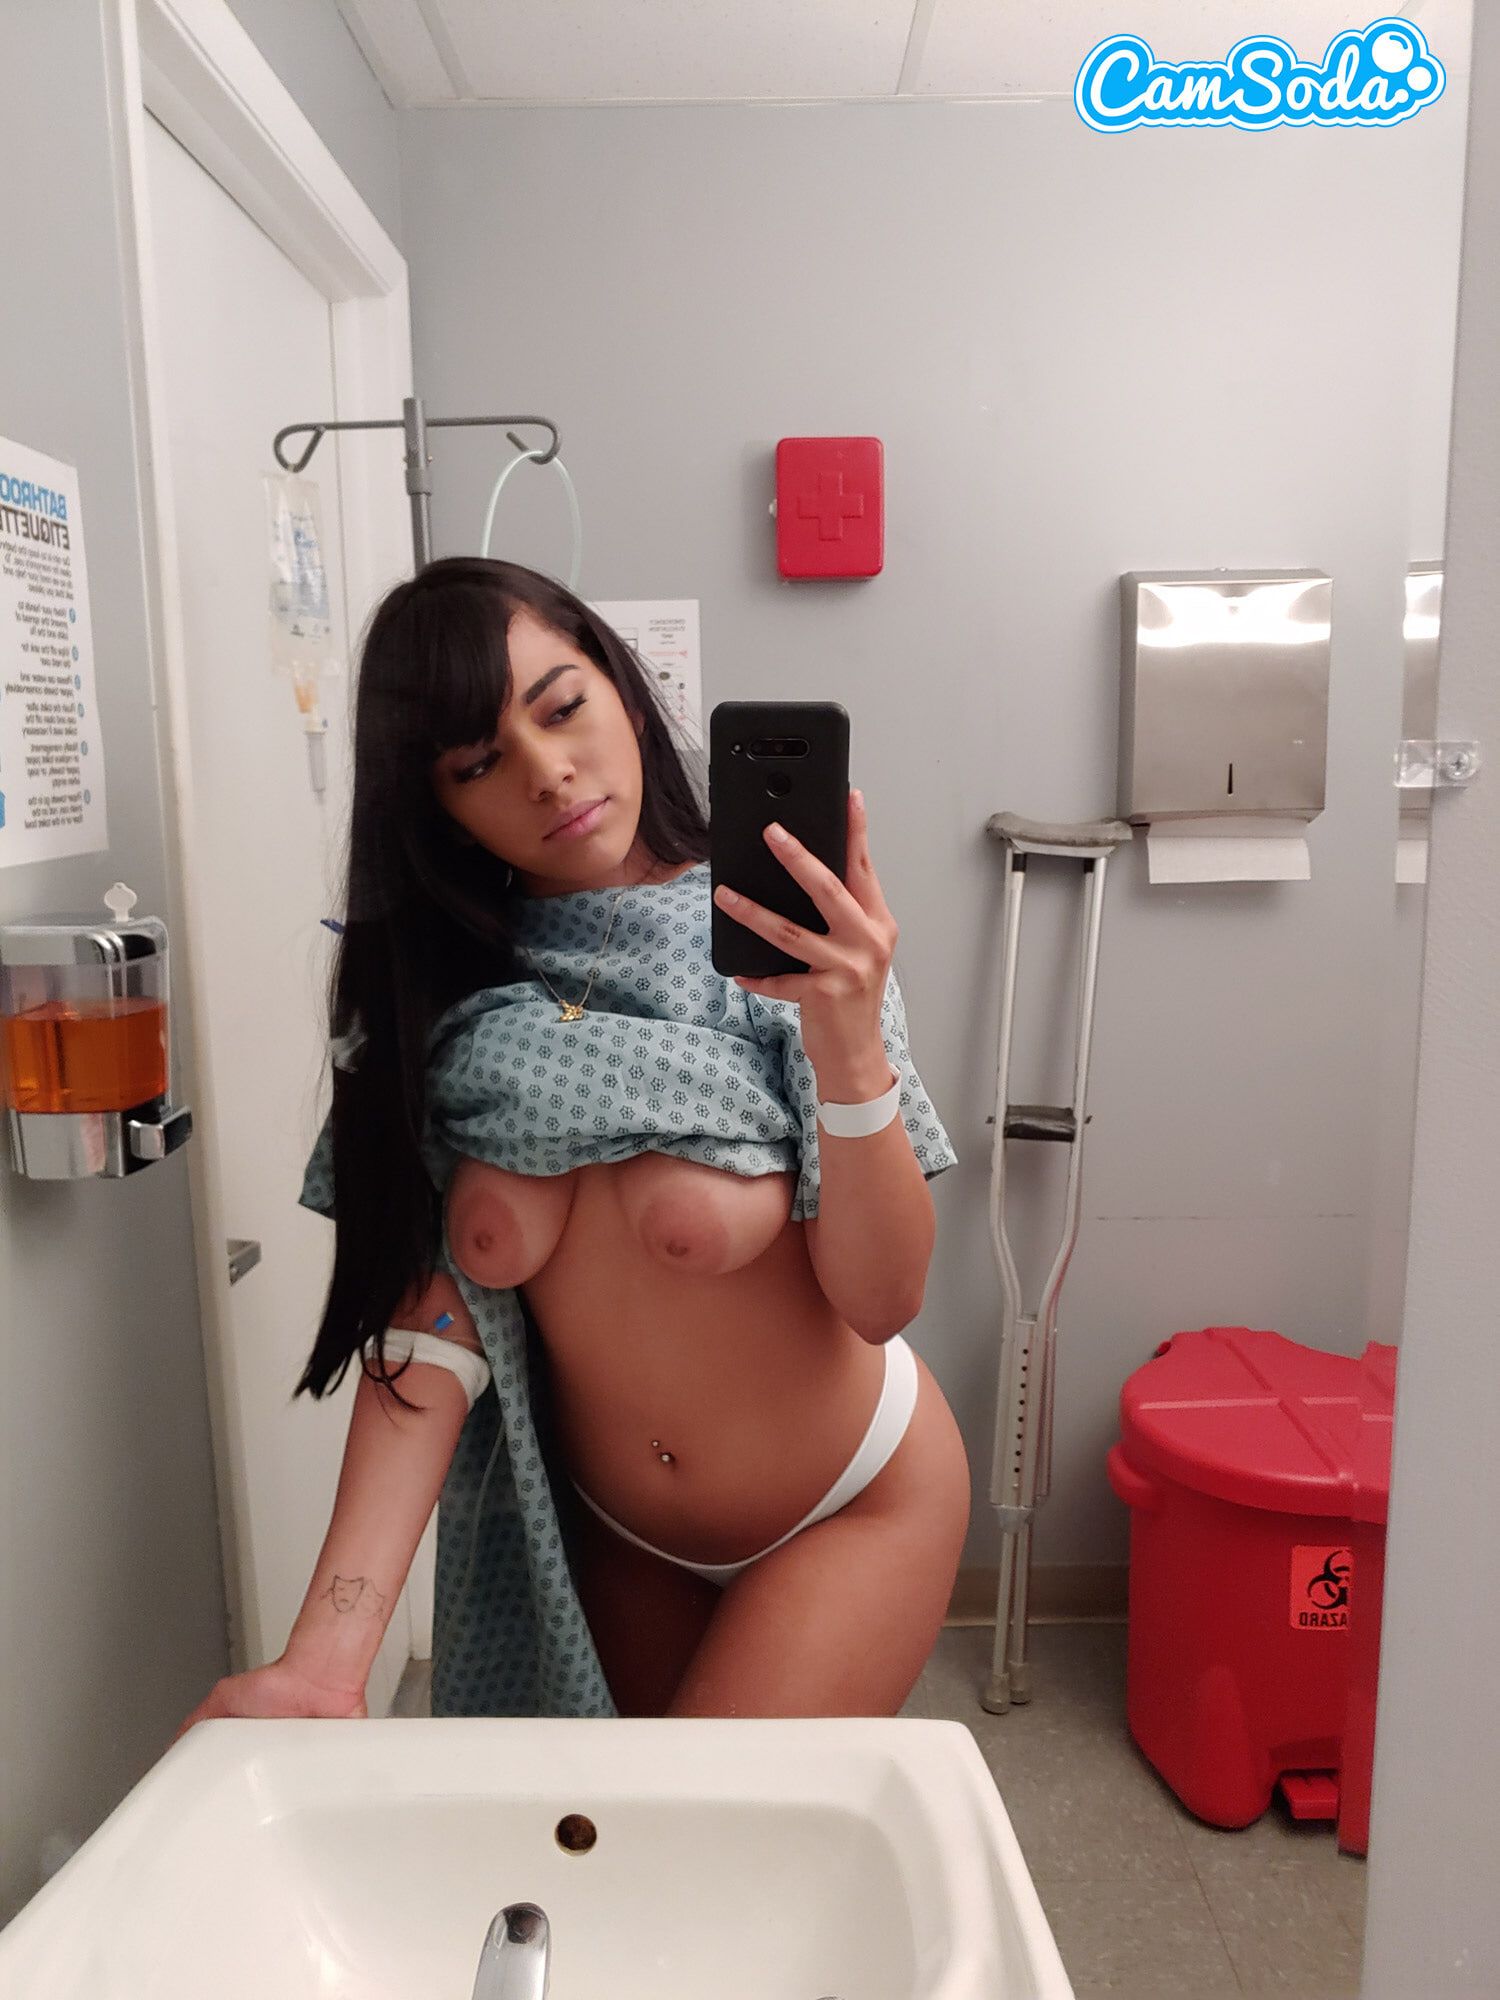 Big bootied latina teen gets horny in the ER #3